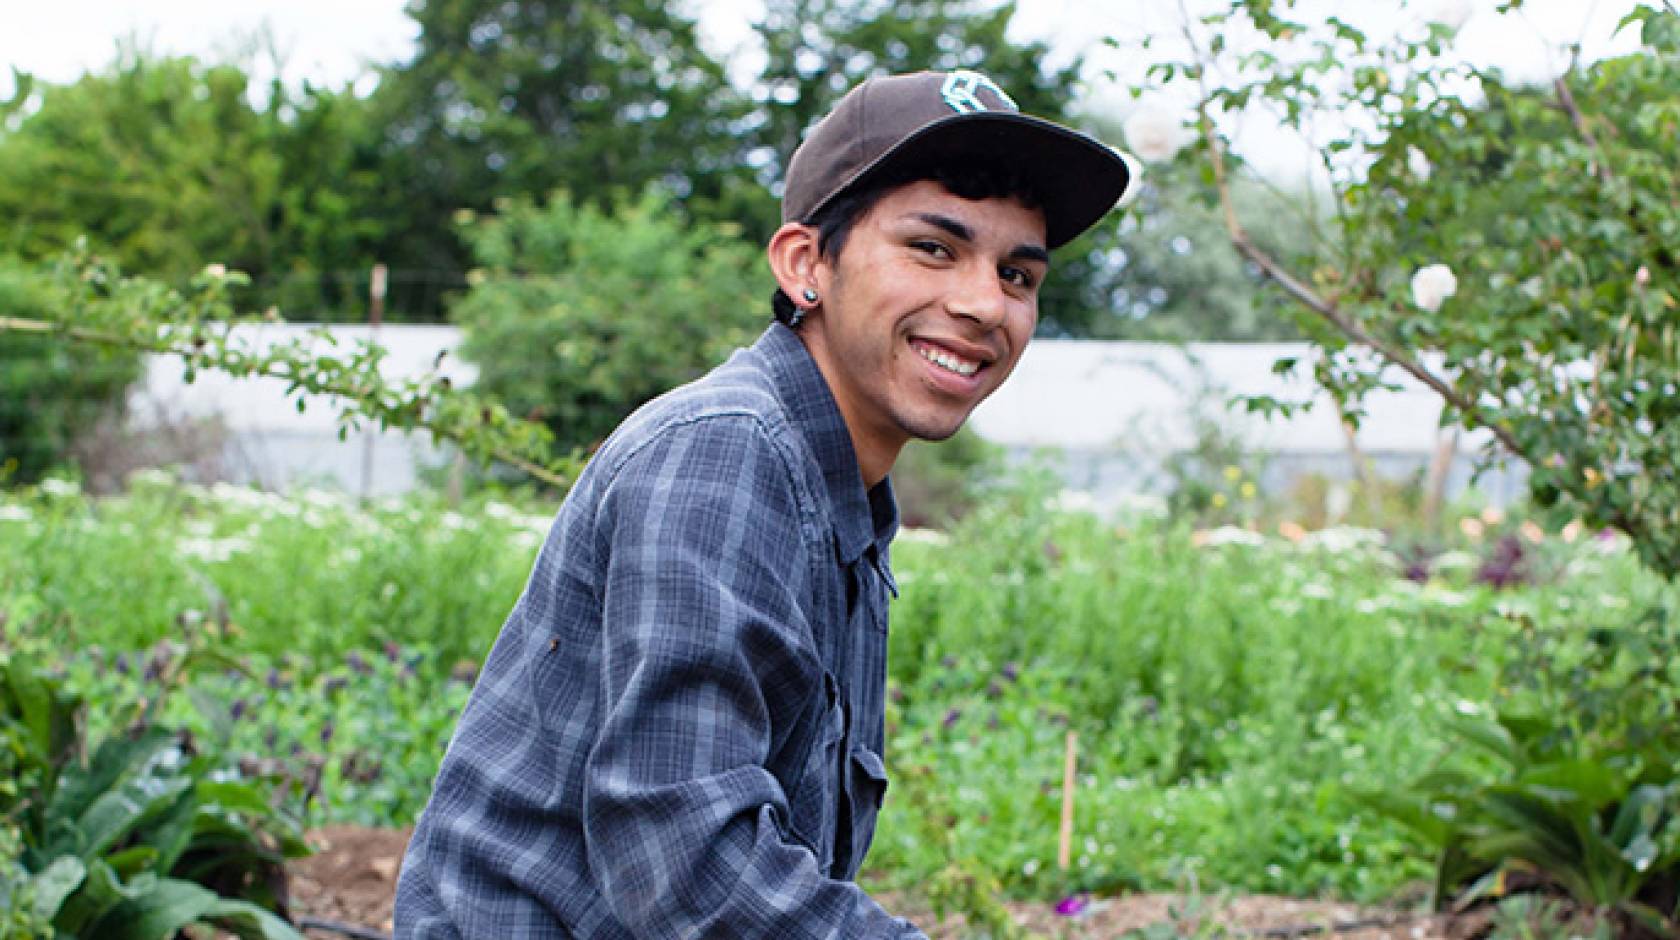 A music video created by David Robles, a Global Food Initiative Fellow, about how students create community through farming and food systems, was screened at the Sustainable Agriculture Education Association conference. 